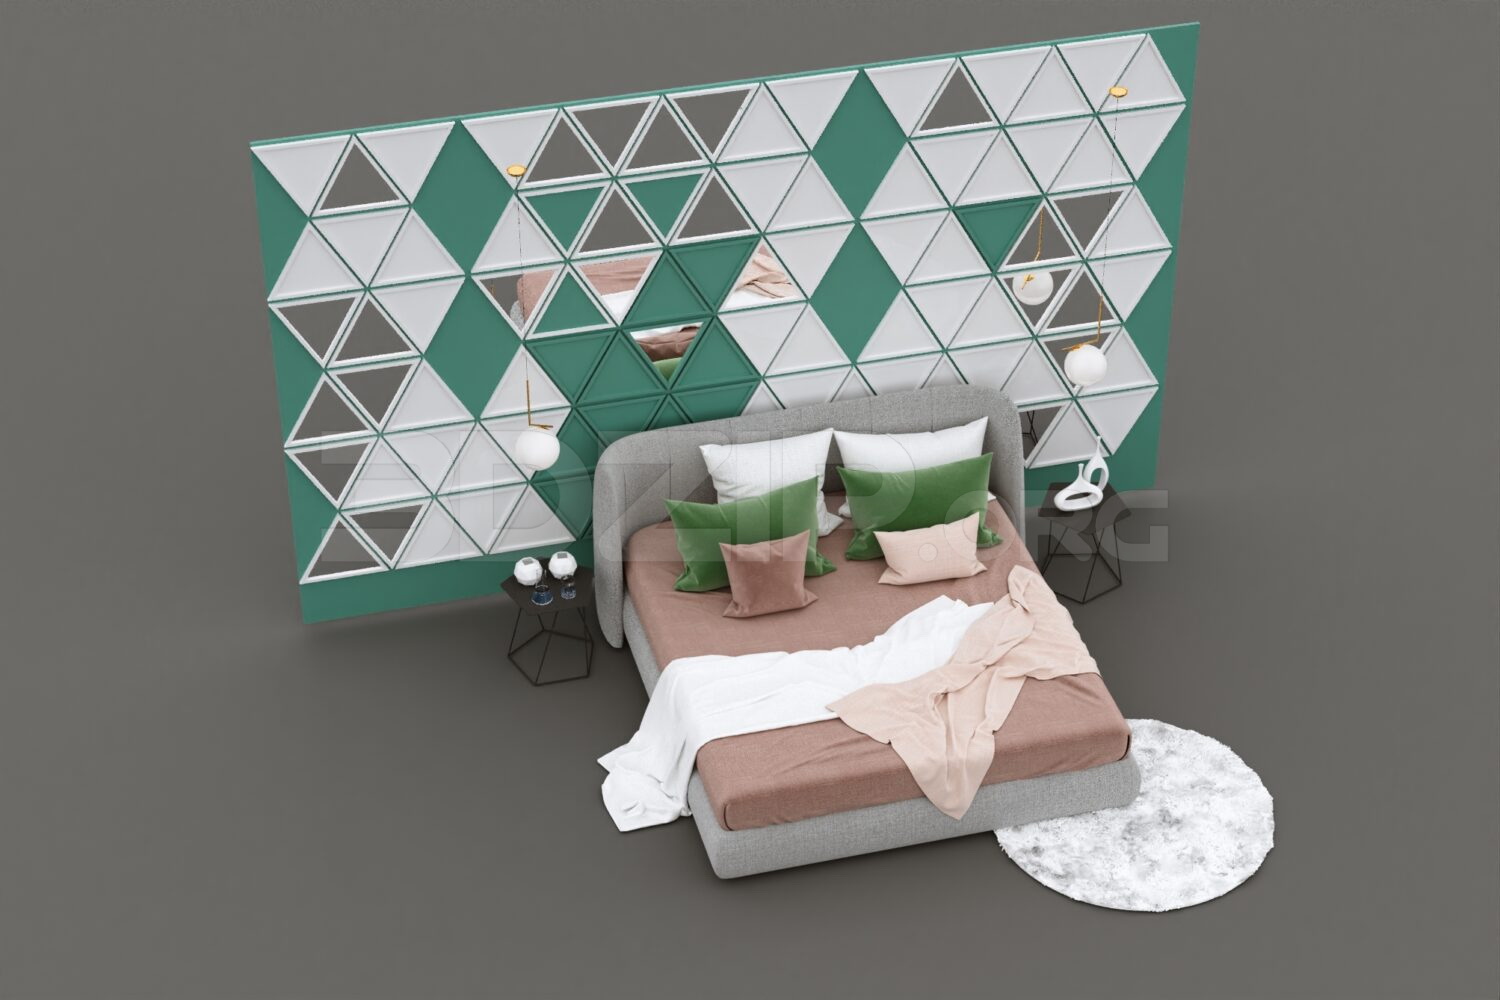 2194. Download Free Bed Model By Nam Hoang